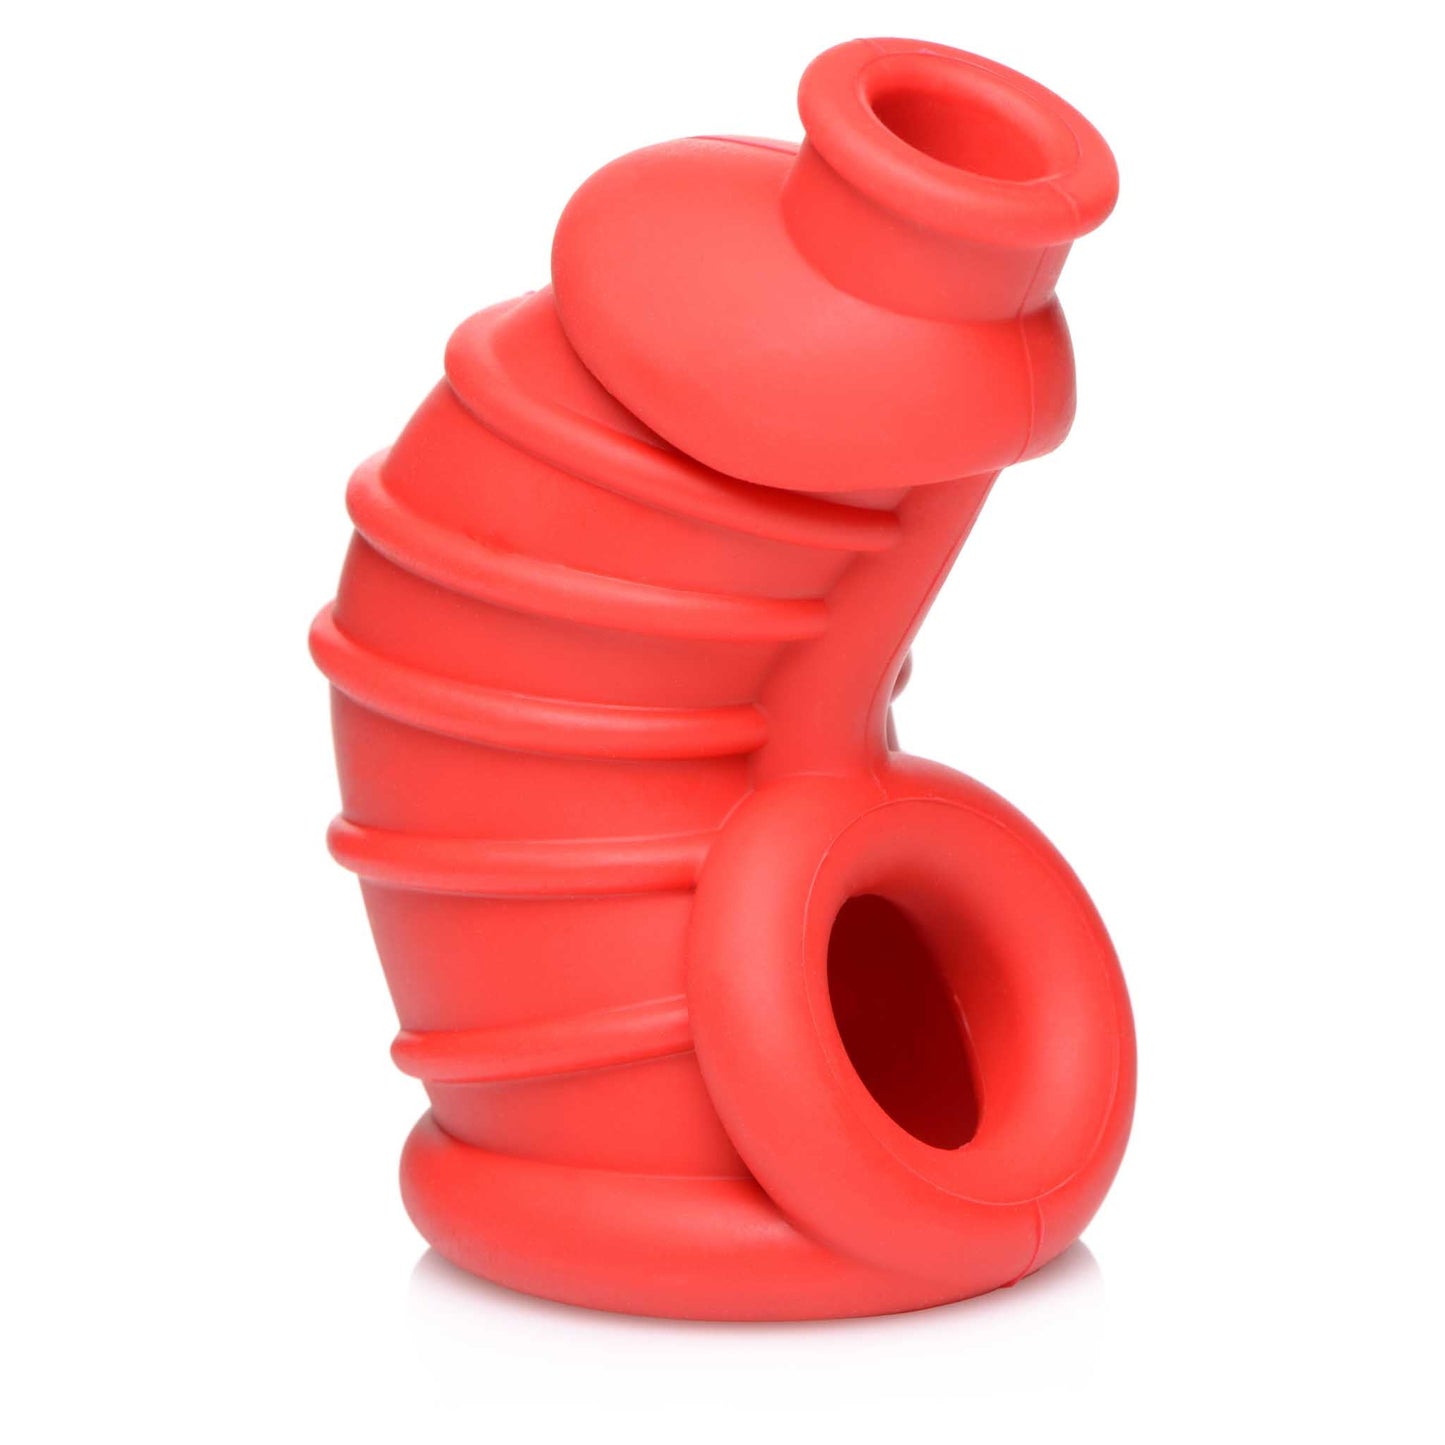 Master Series Crimson Chamber Silicone Chastity Cage - Red